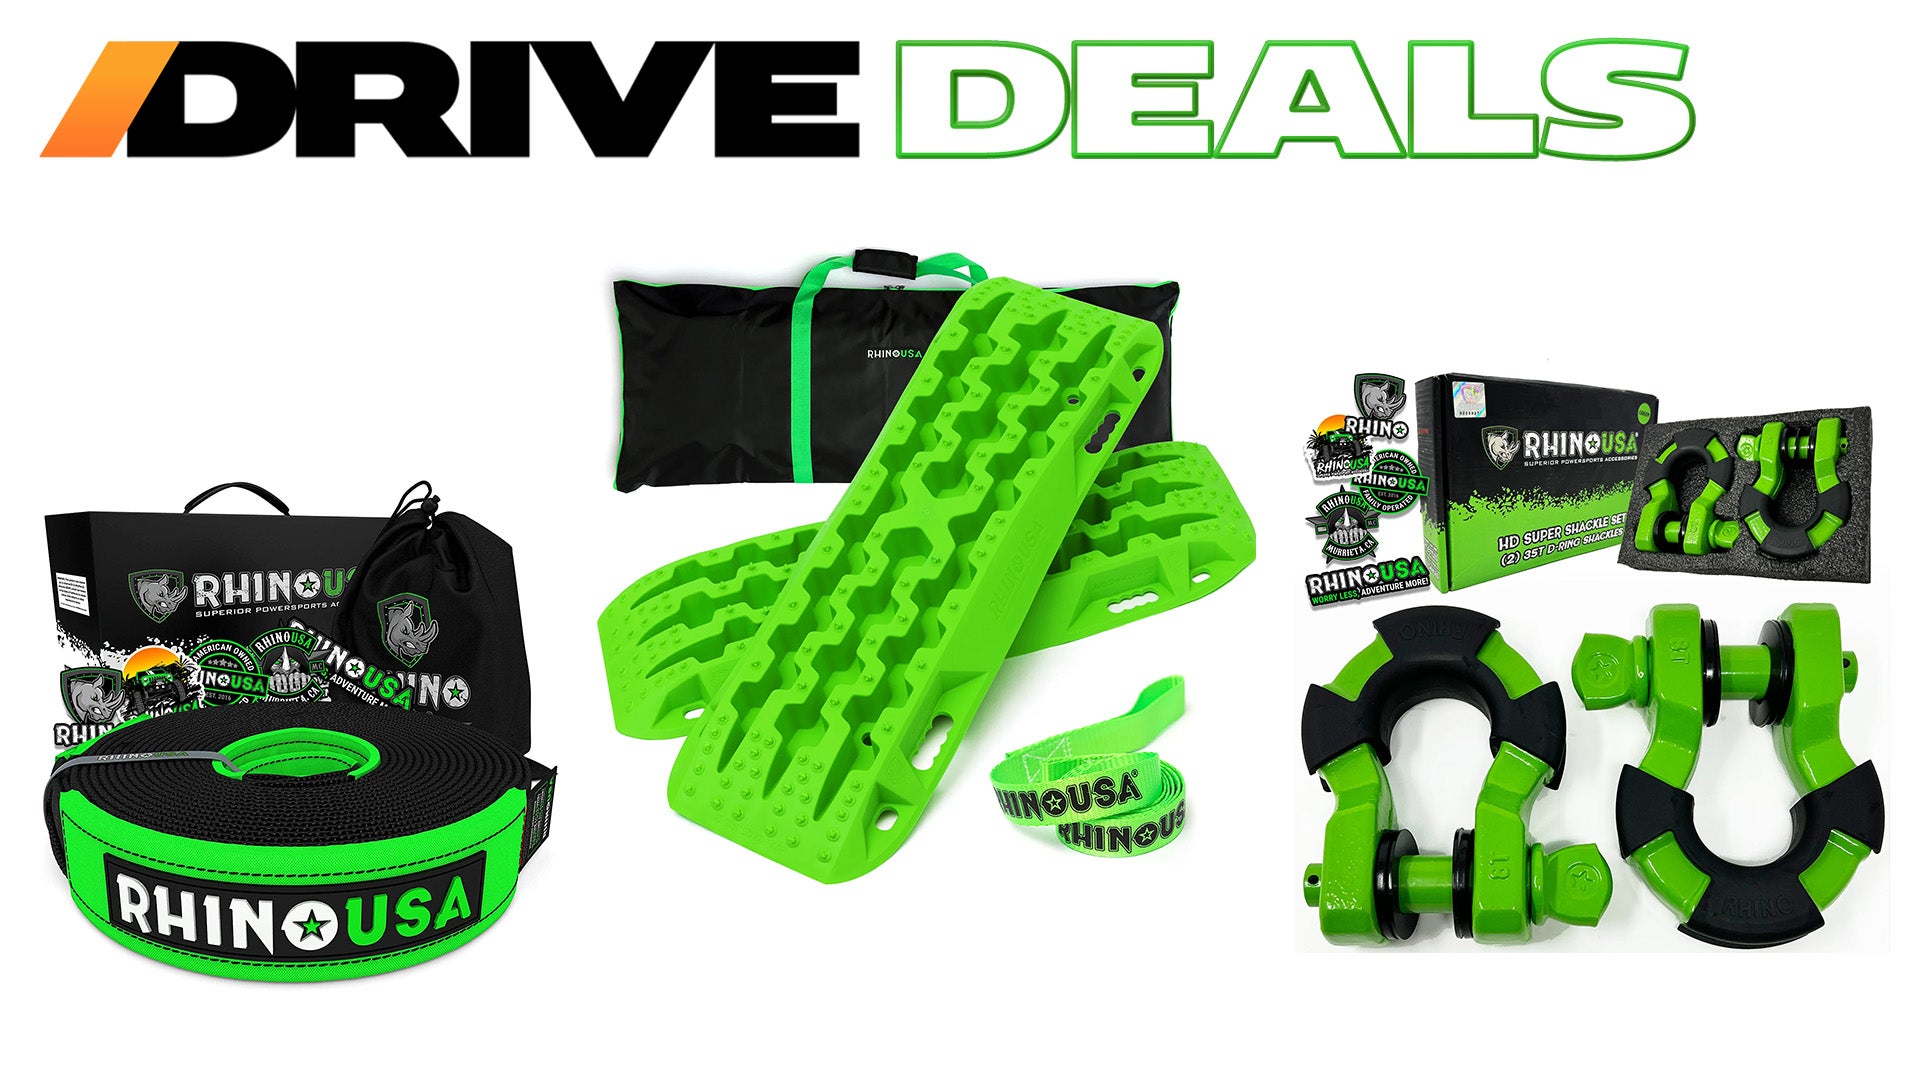 Grab the Trail By the Horns With These Rhino USA Deals